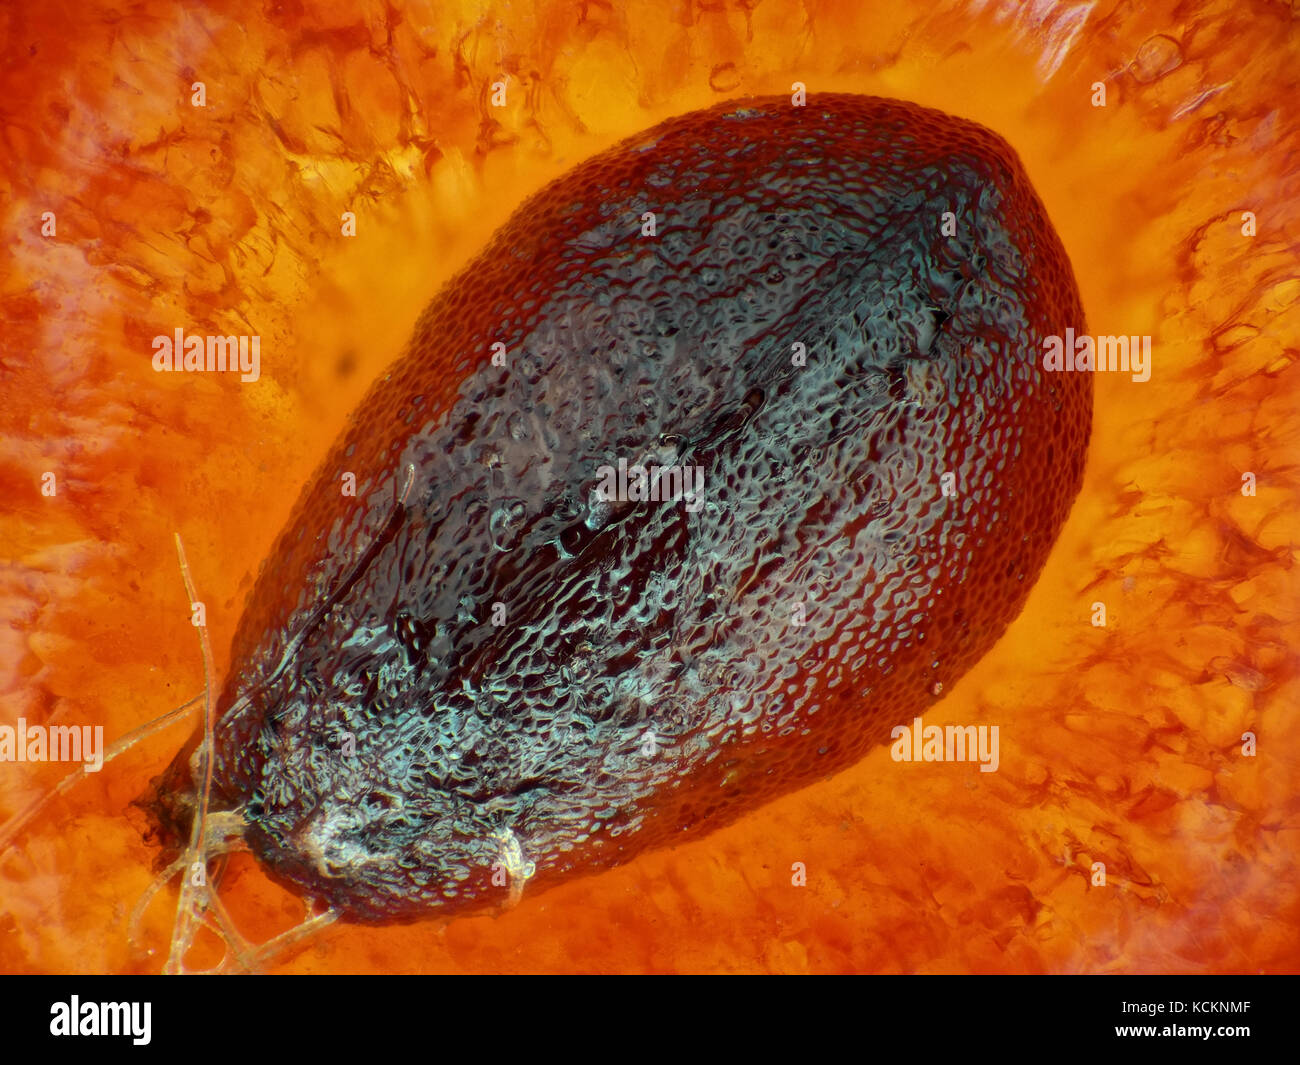 Light micrograph of a strawberry 'seed' (achene), pictured area is about 1.7mm wide Stock Photo